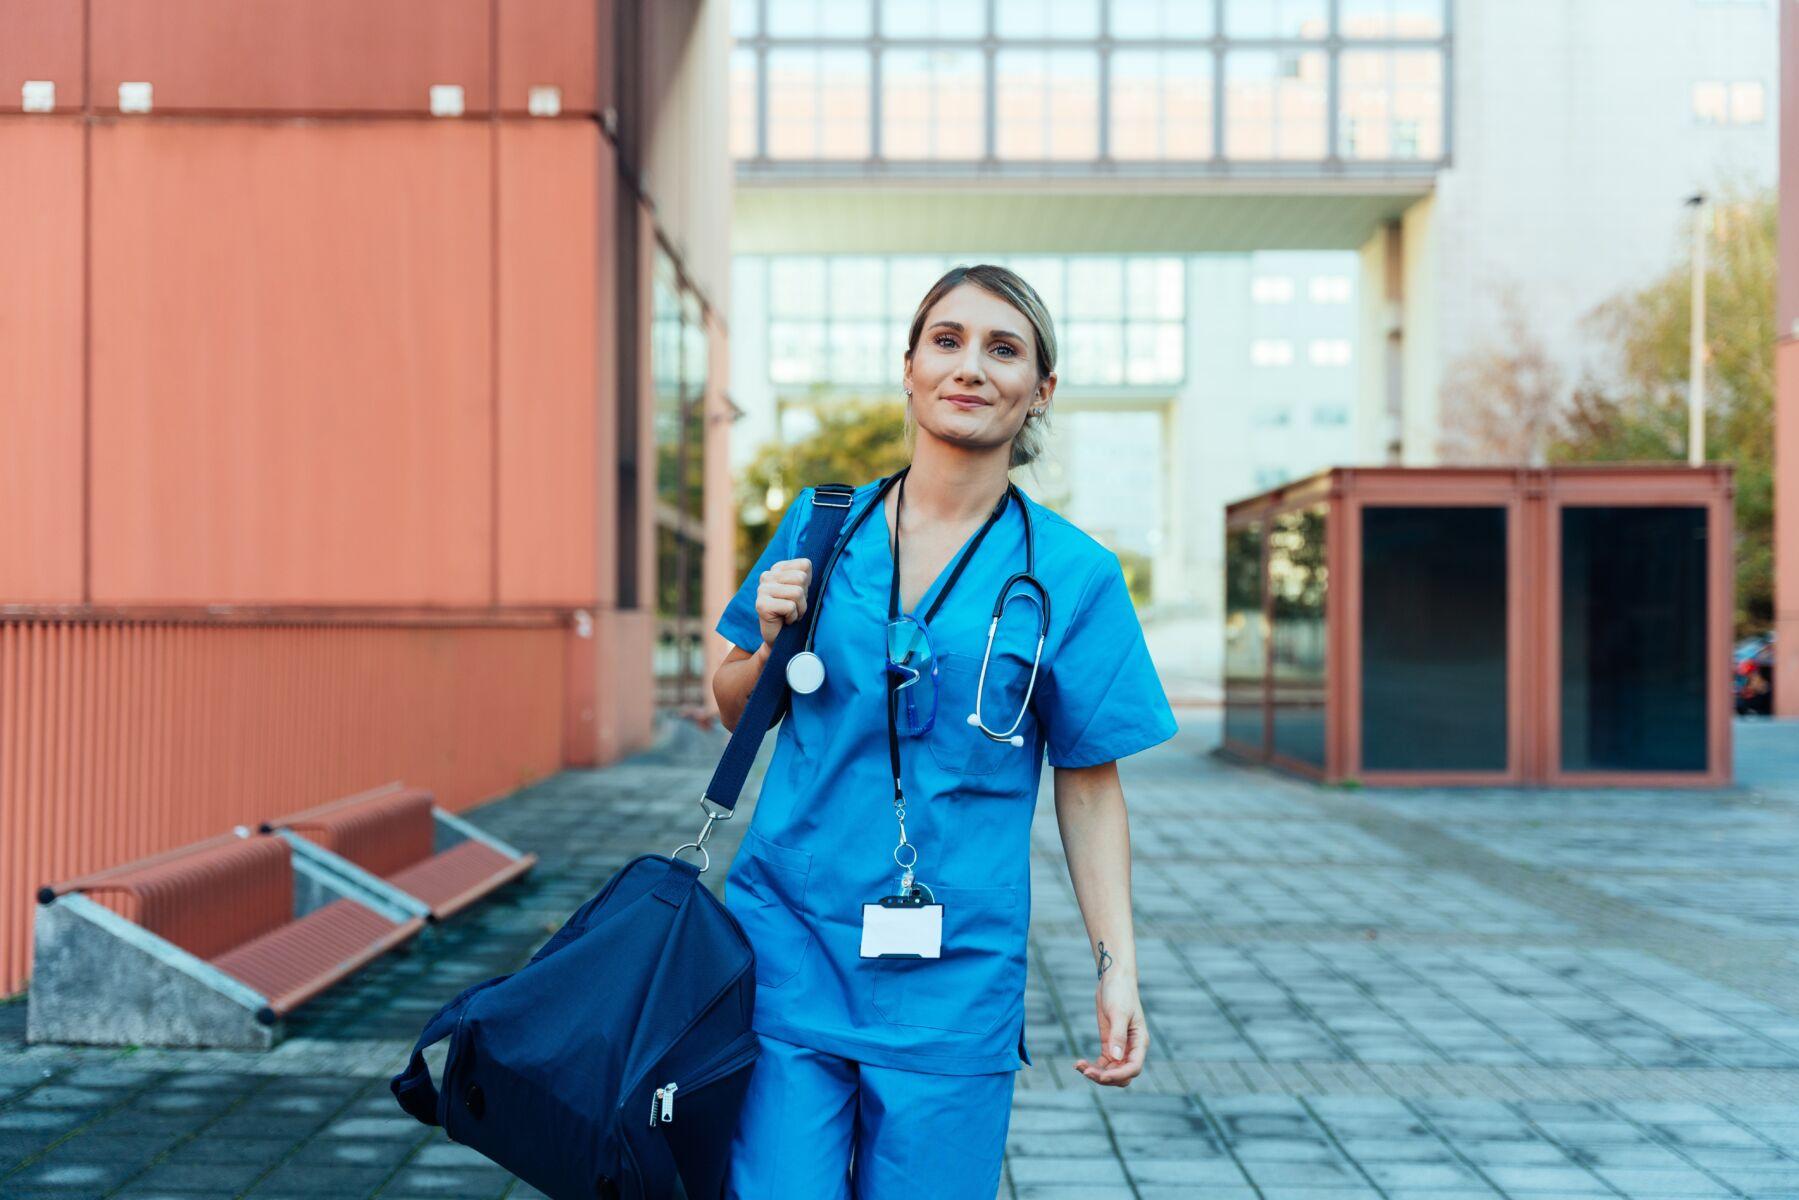 Top 9 packing tips for traveling nurses 